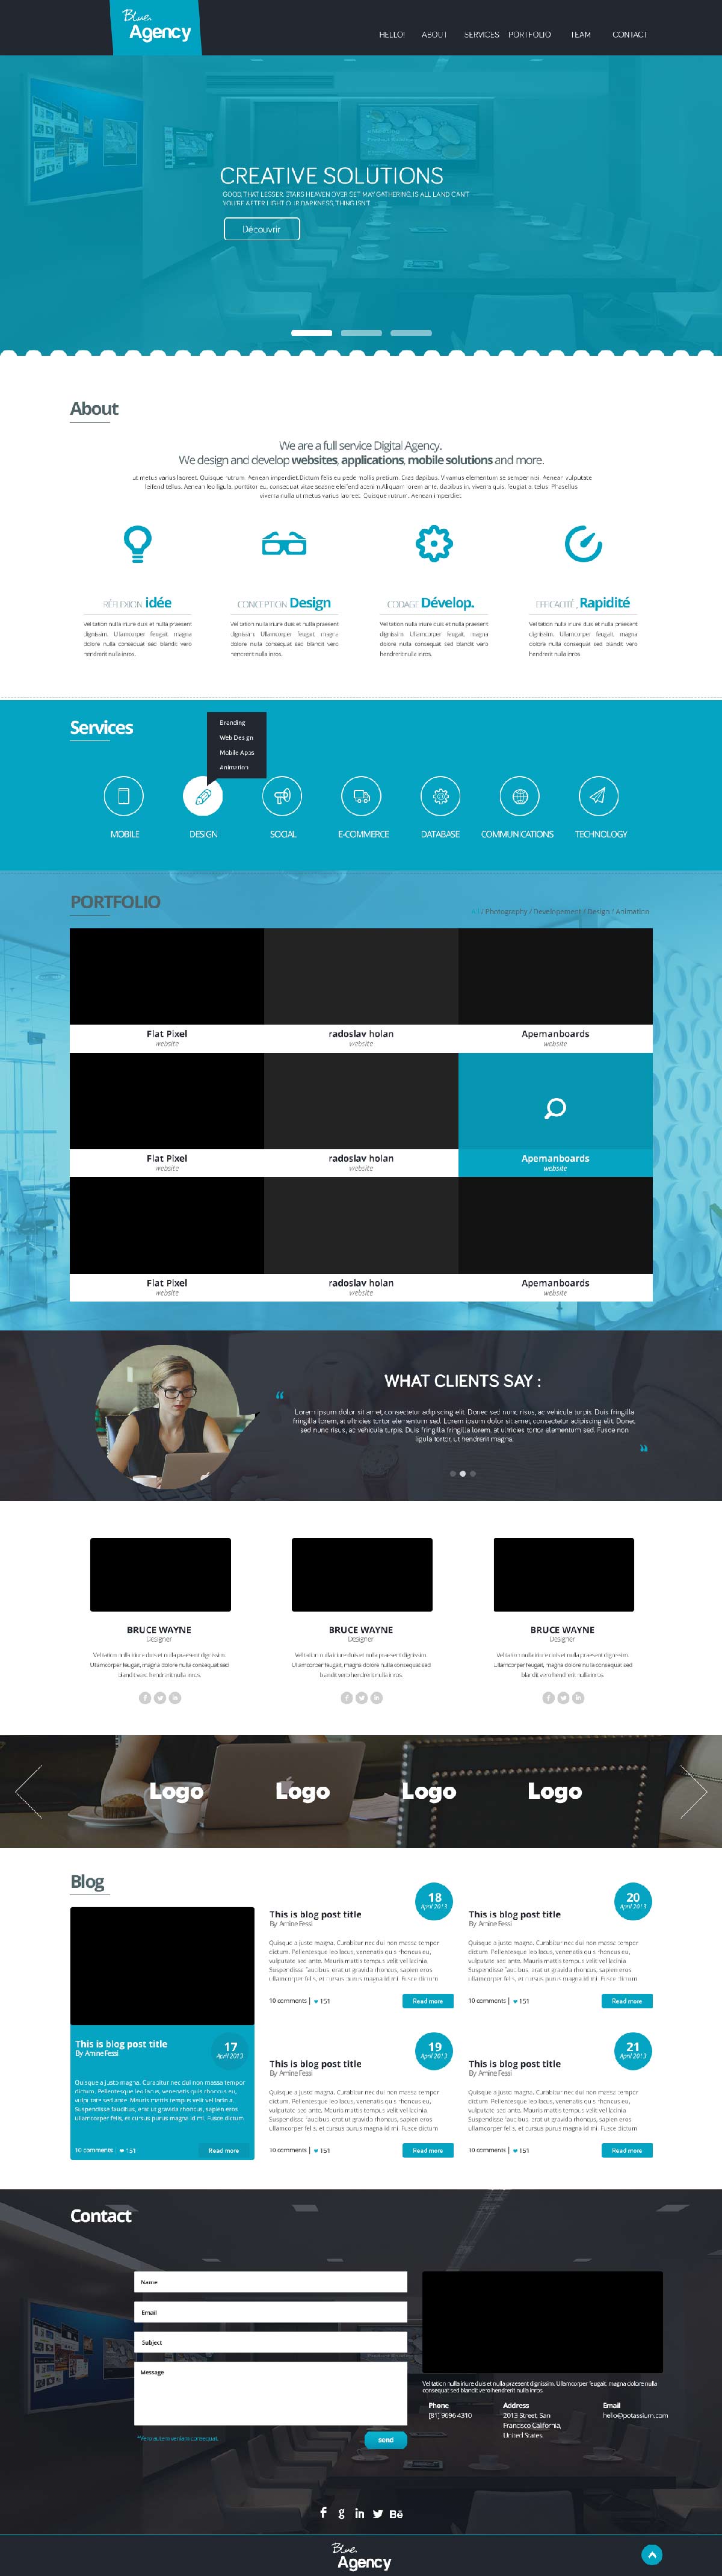 Blue Agency one page website PSD